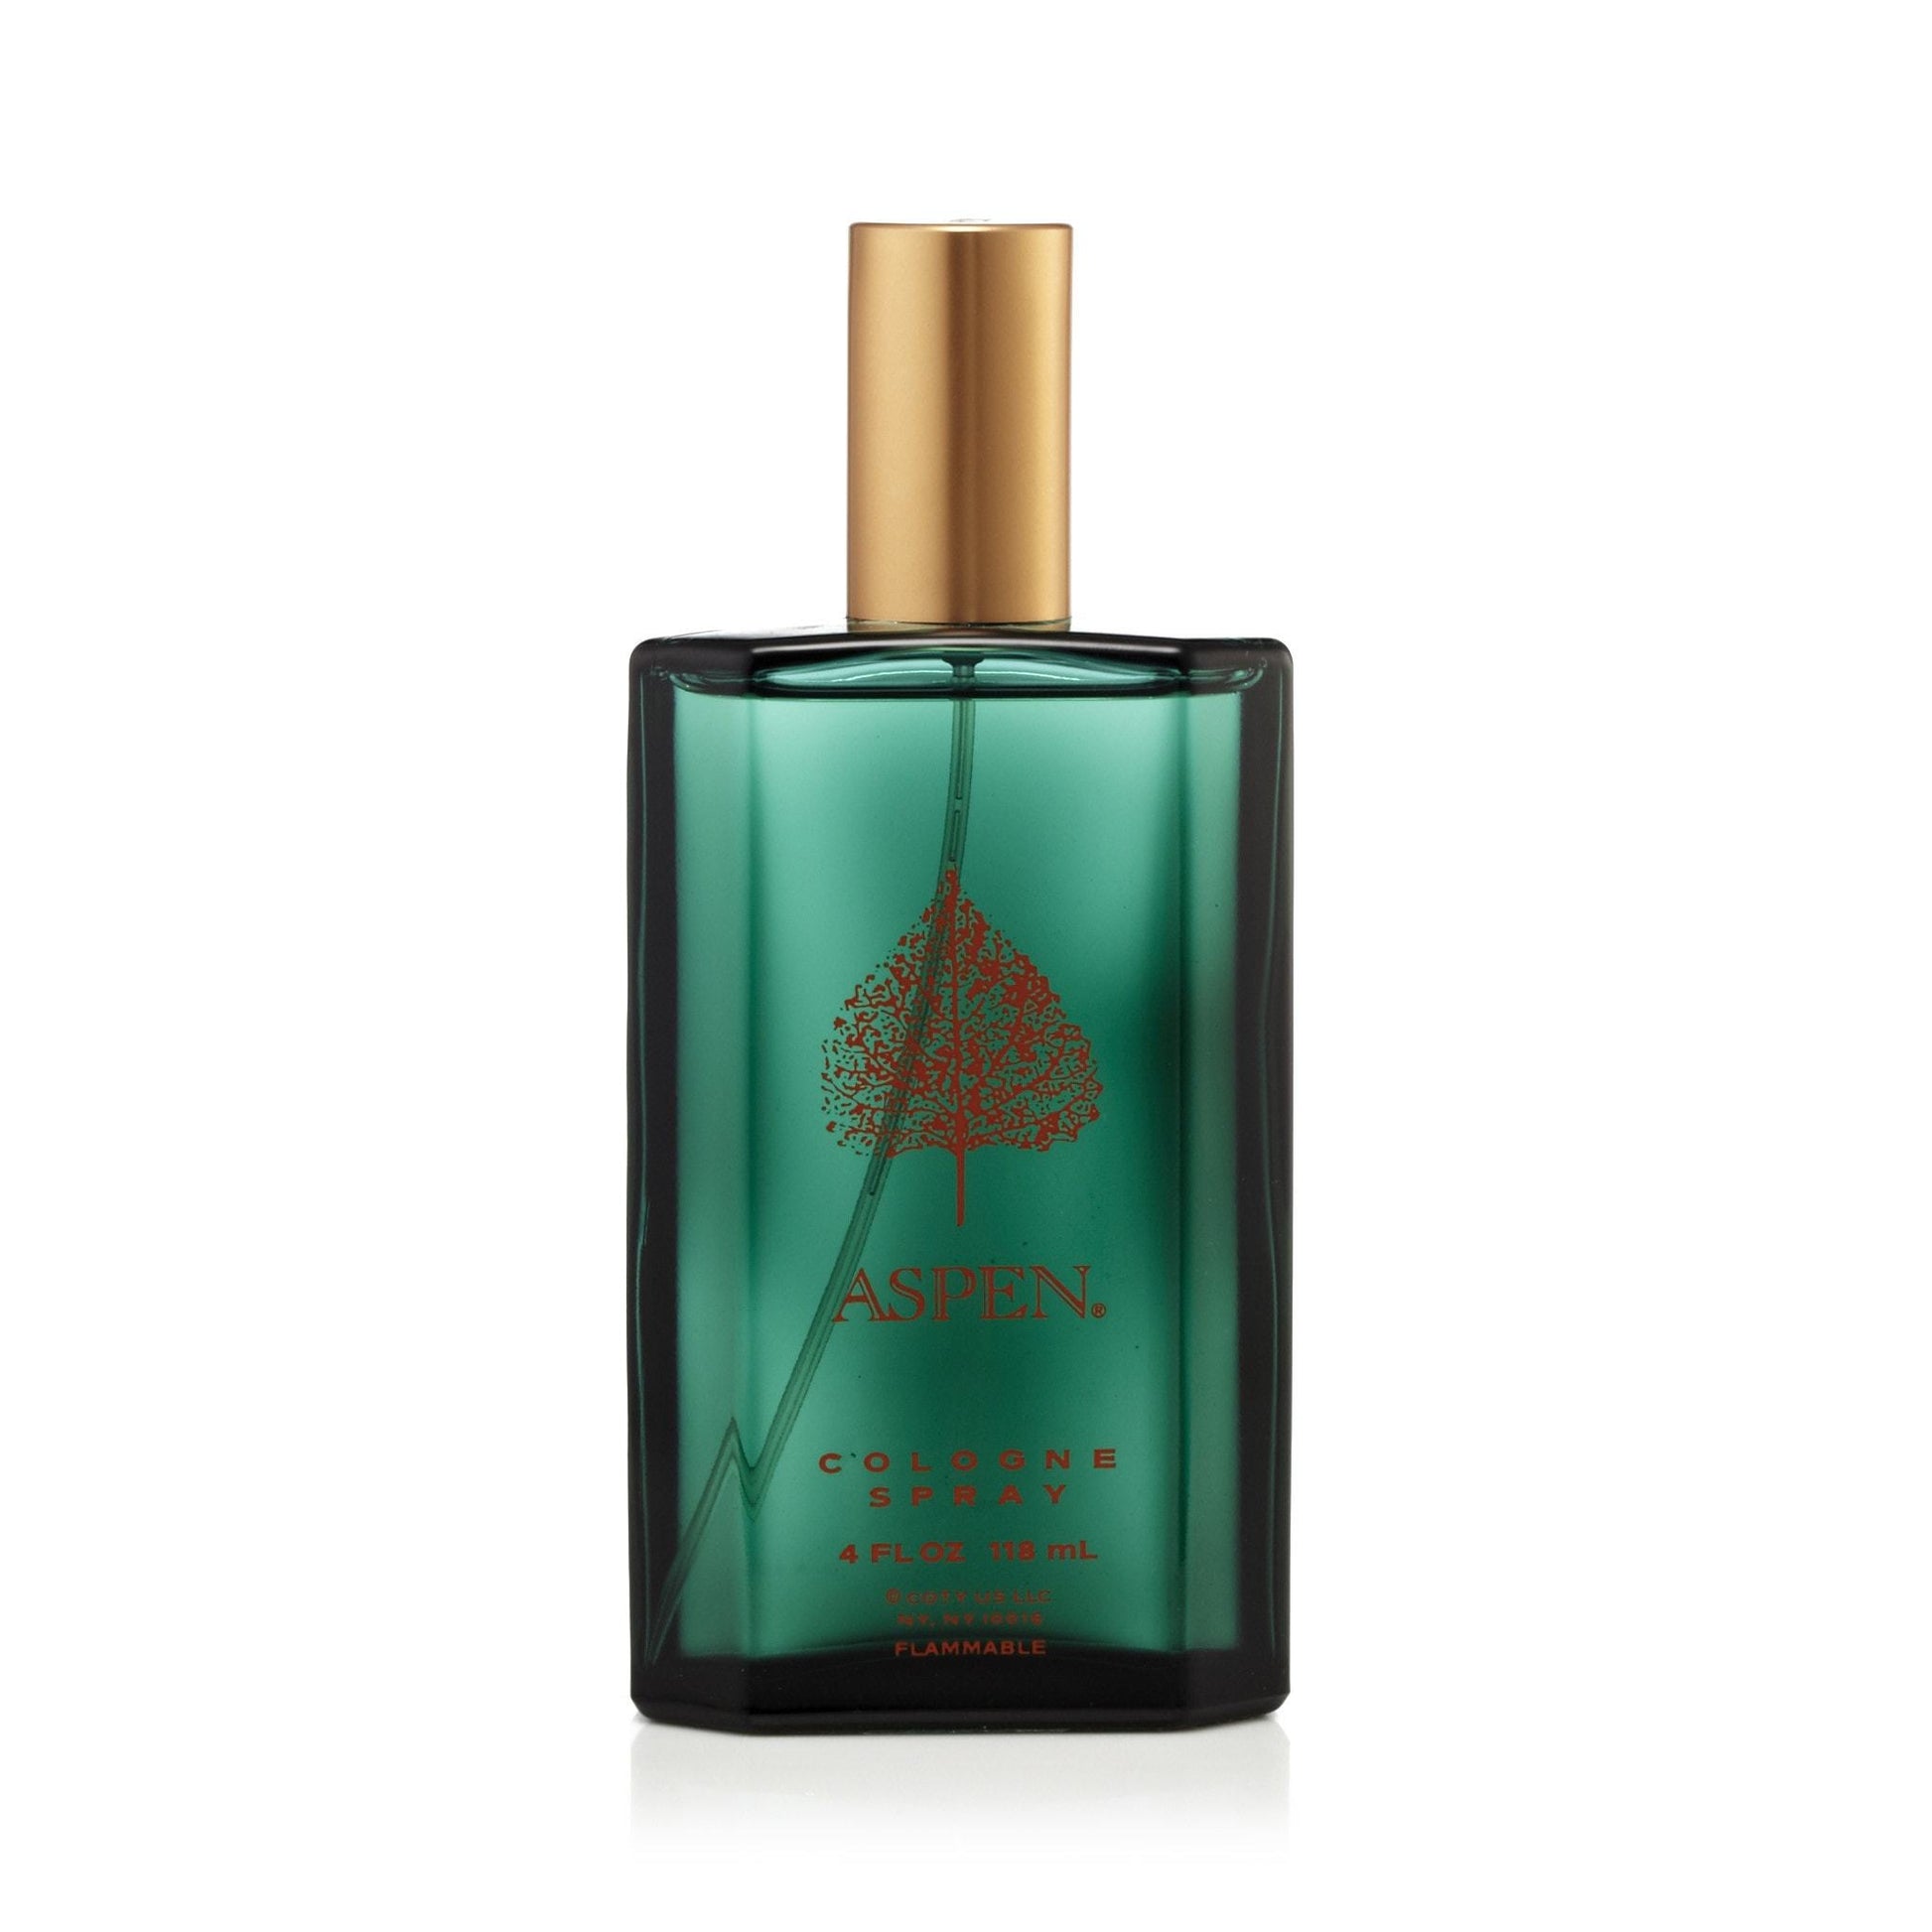 Aspen Cologne Spray for Men by Coty, Product image 2